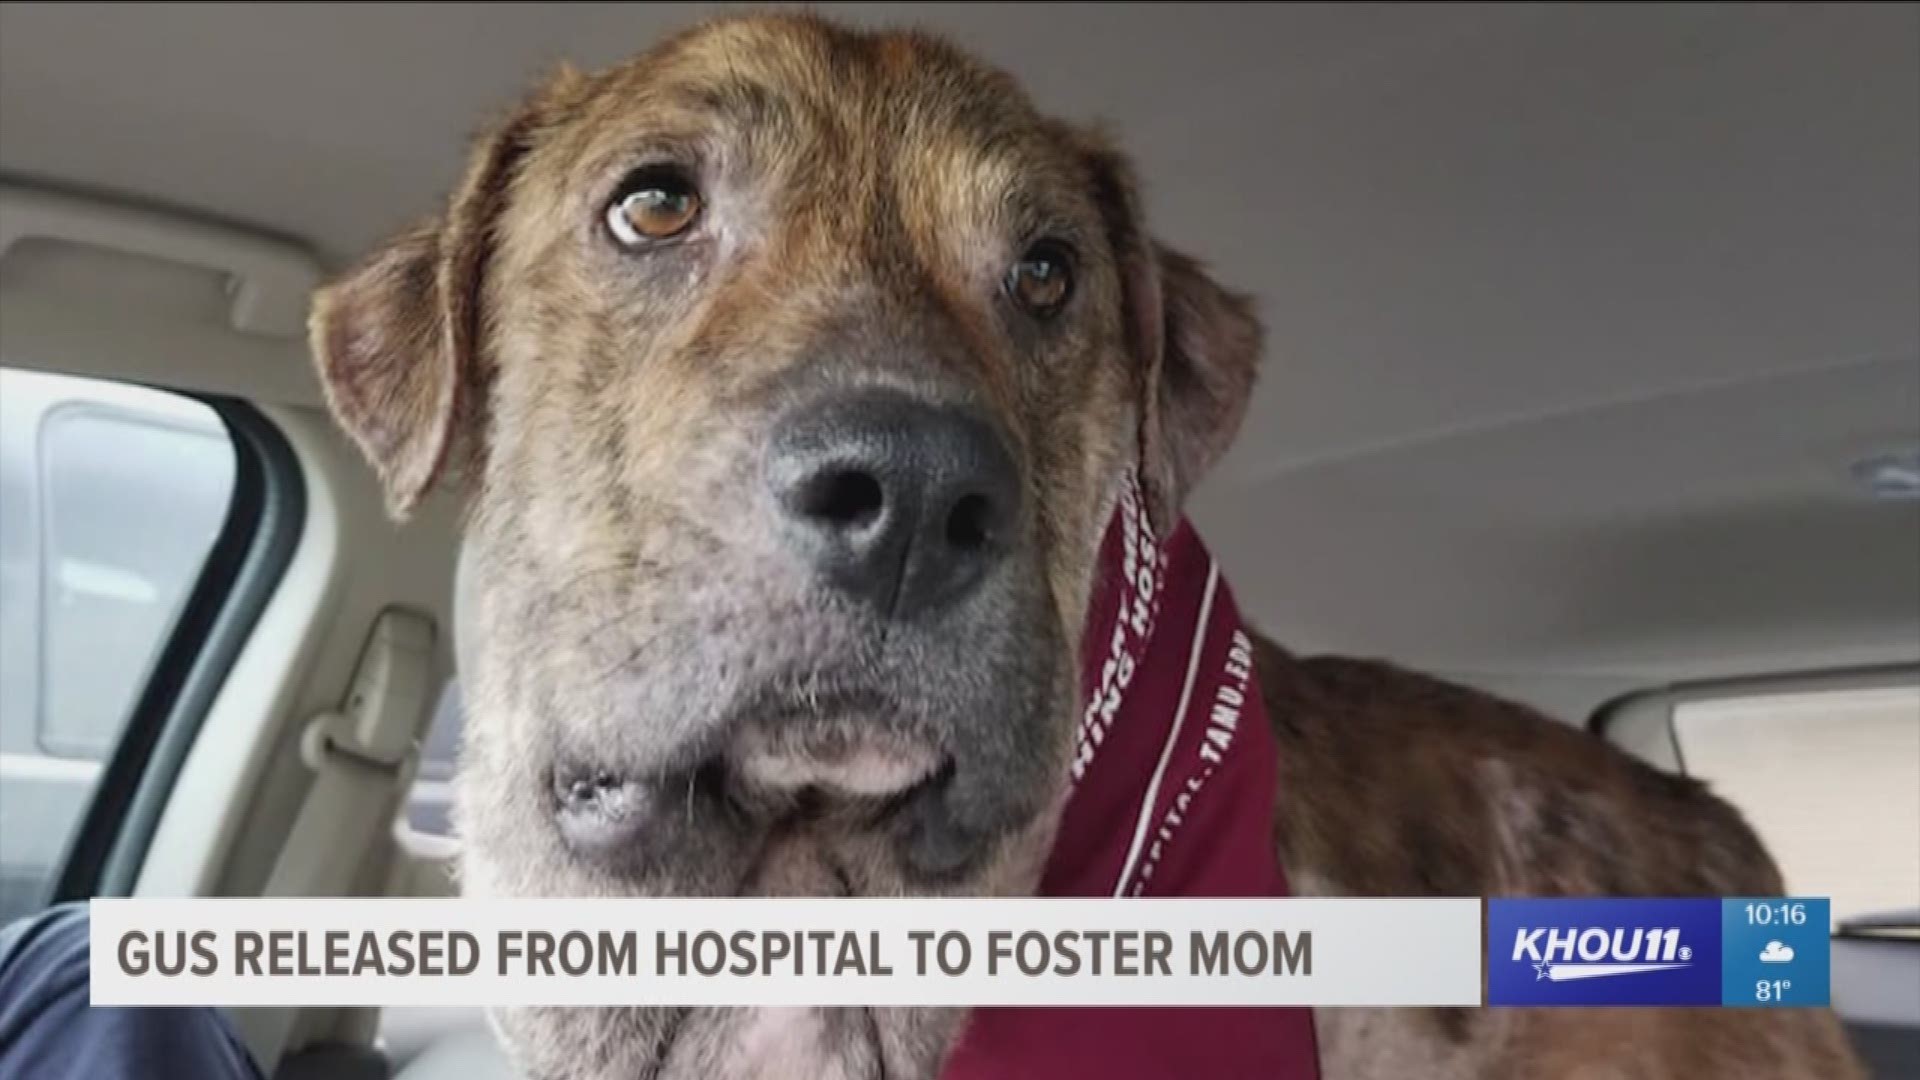 Gus has been released from the hospital and he has a foster mom.